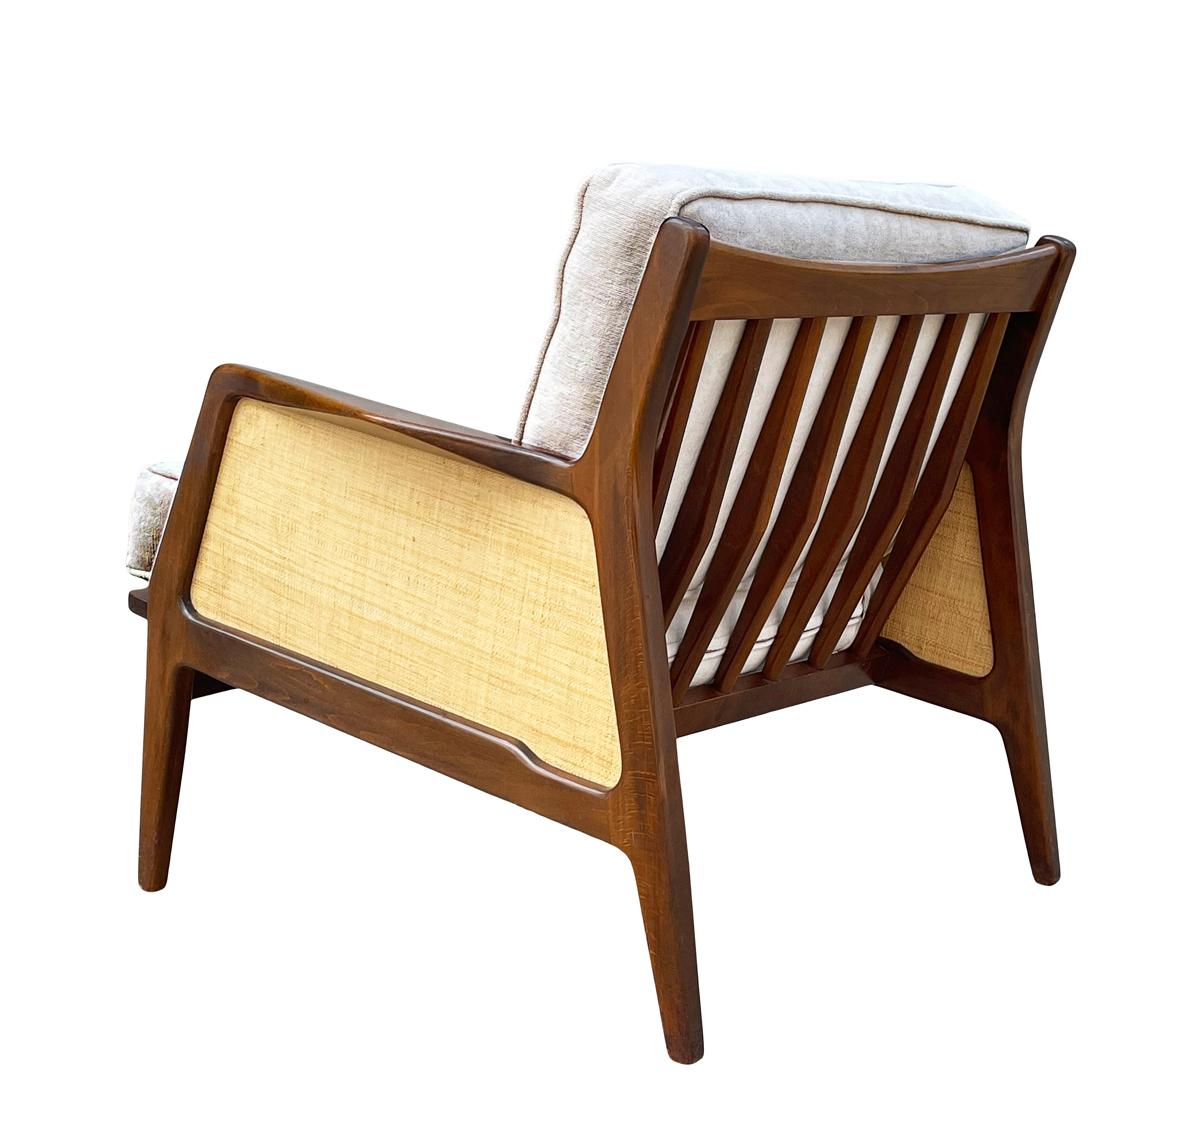 A rare & early lounge chair designed by IB Kofod-Larsen and produced in Denmark, ca. 1950's. It features solid walnut framing, grasscloth side panels, and white seat cushions. Cushions were recovered at some point.